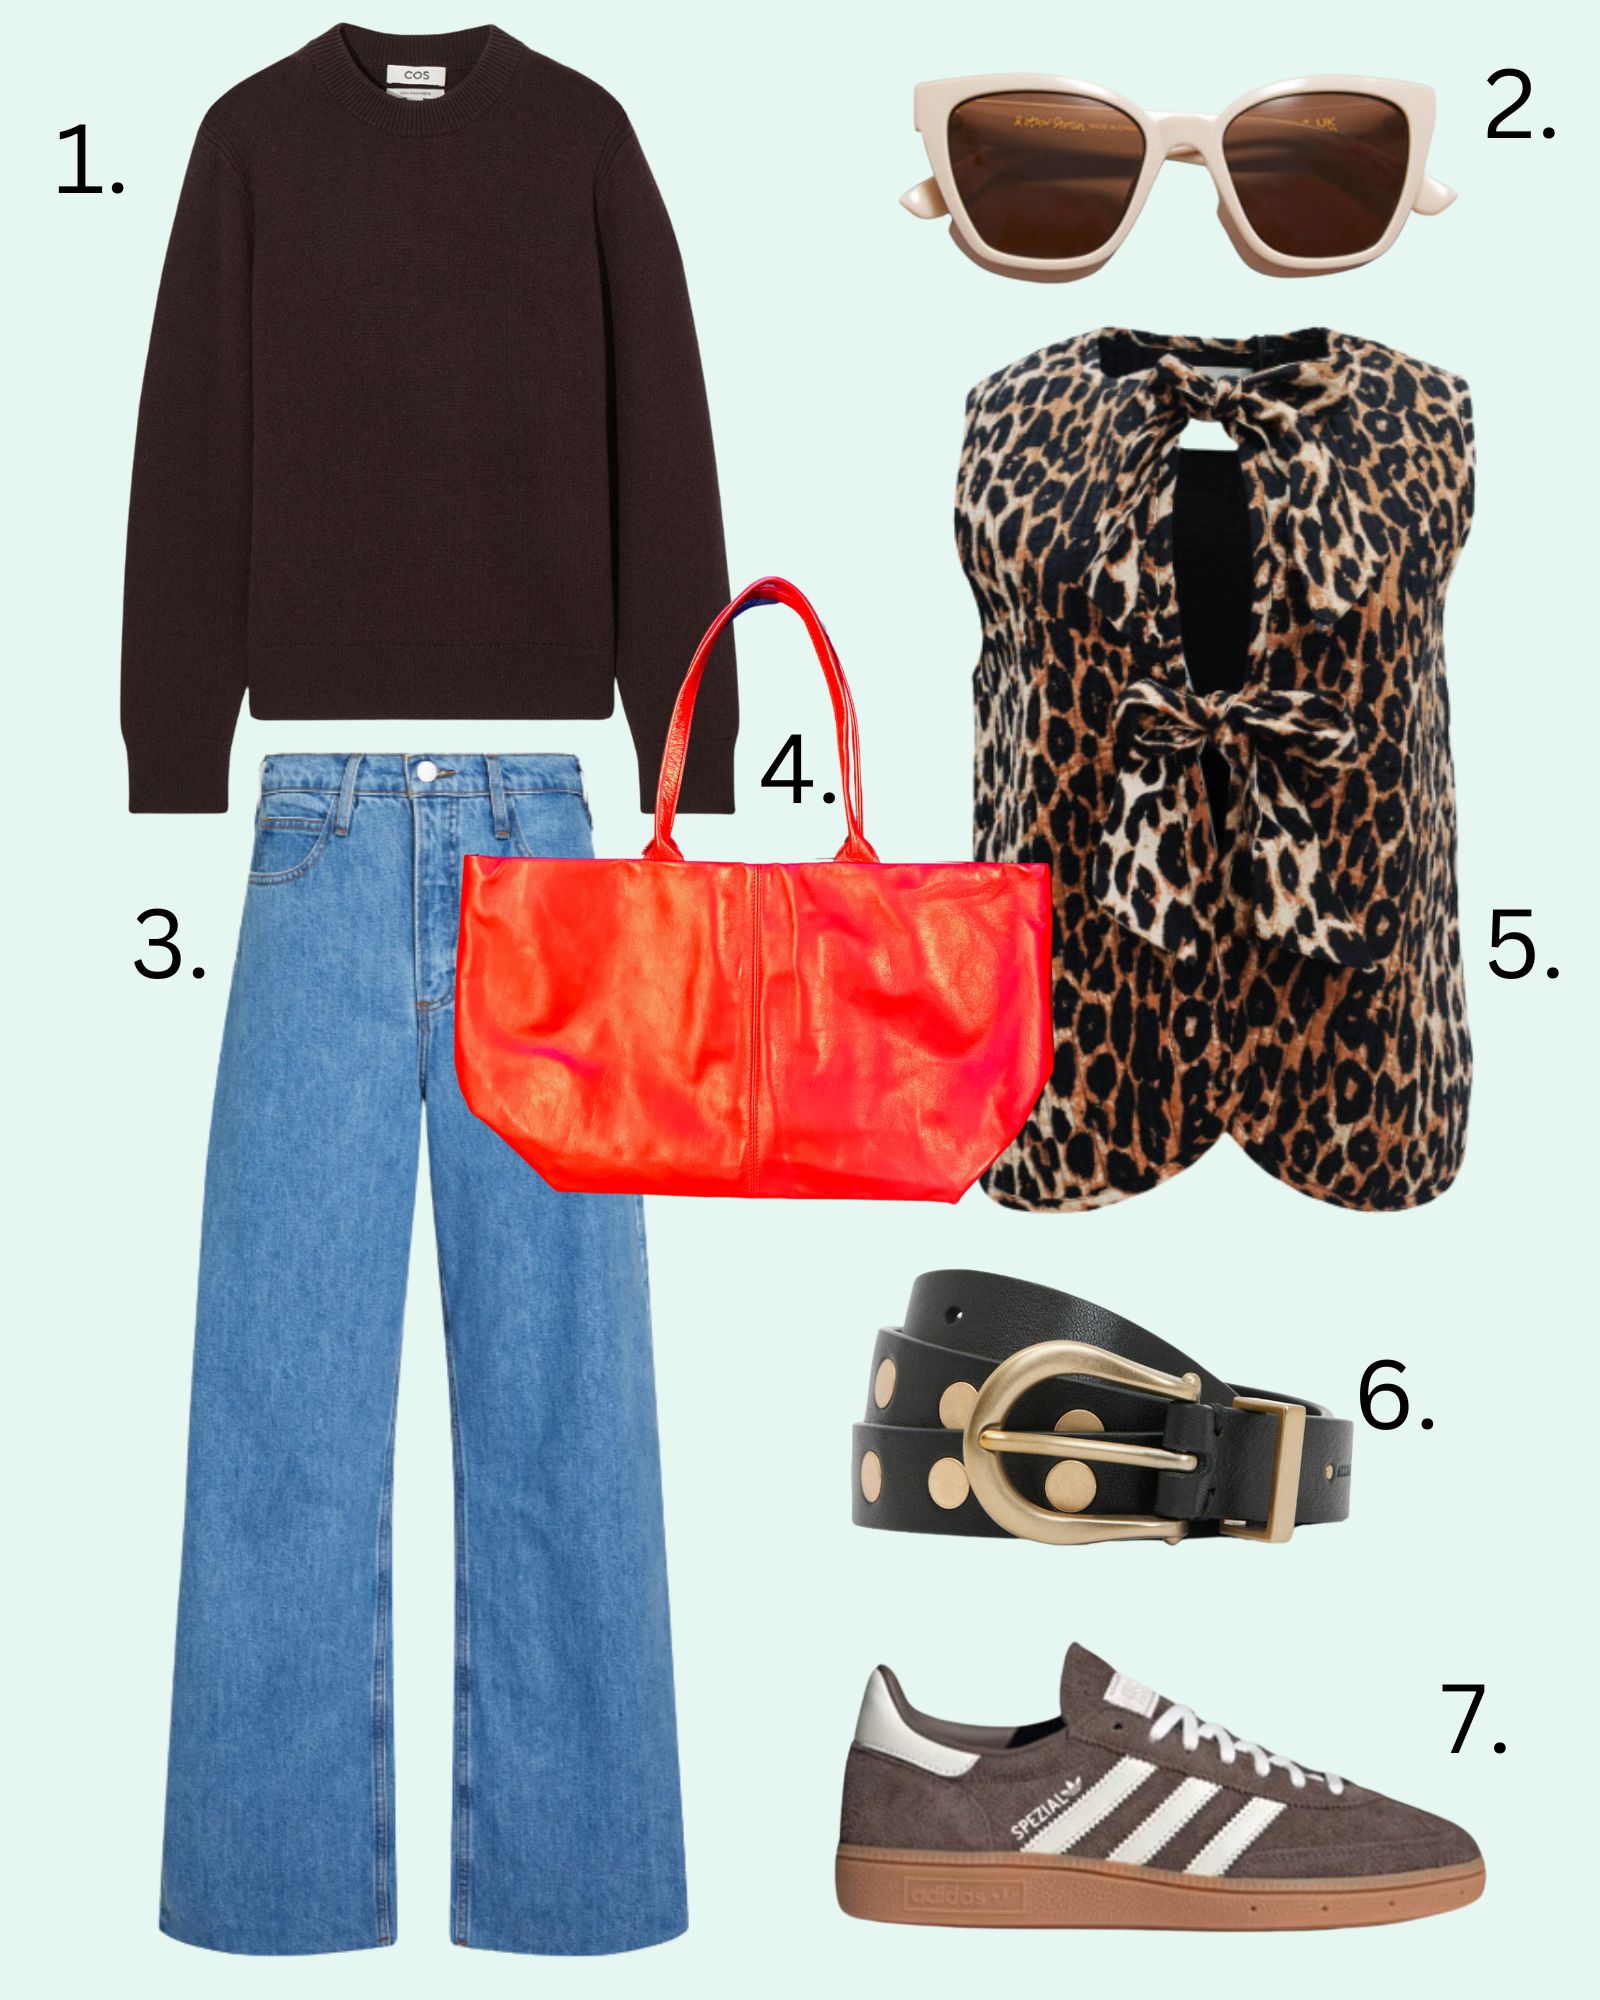 7 outfit ideas for March. Leopard waistcoat and red bag 